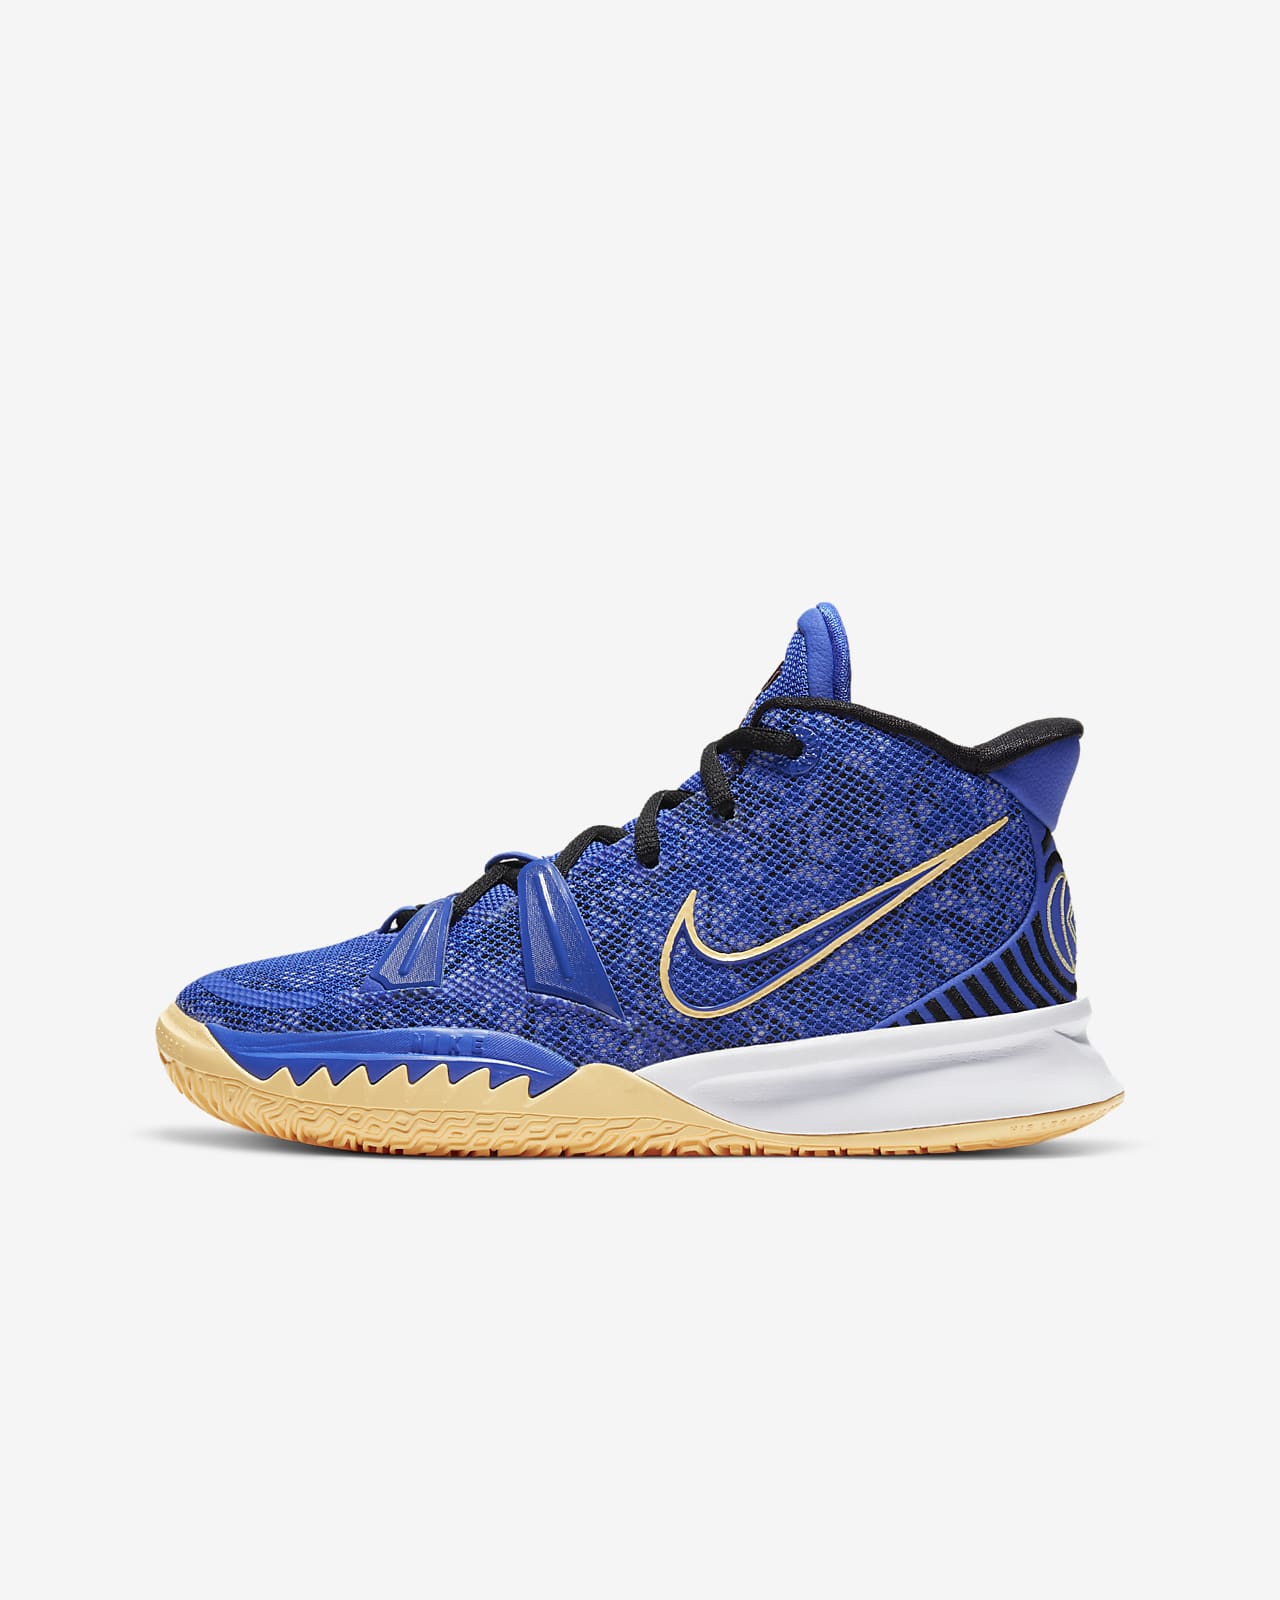 kyrie 7 basketball shoes